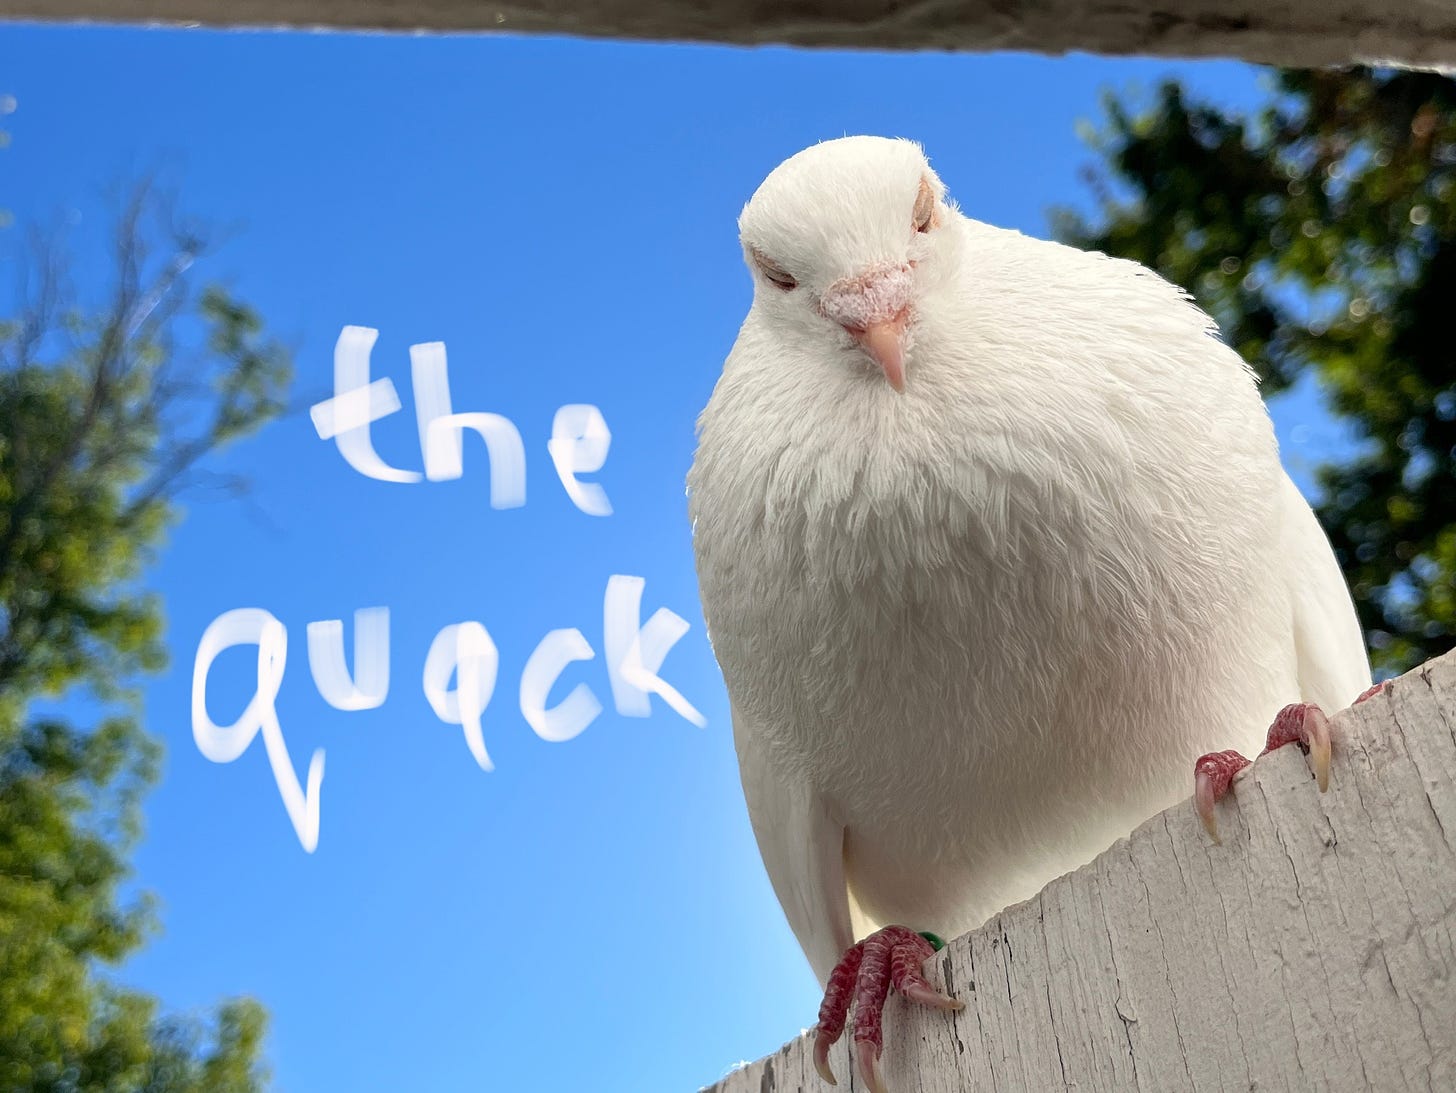 A white pigeon glares down from the top of a door, the words "the quack" are written in whispy, cloud-like letters on the blue sky